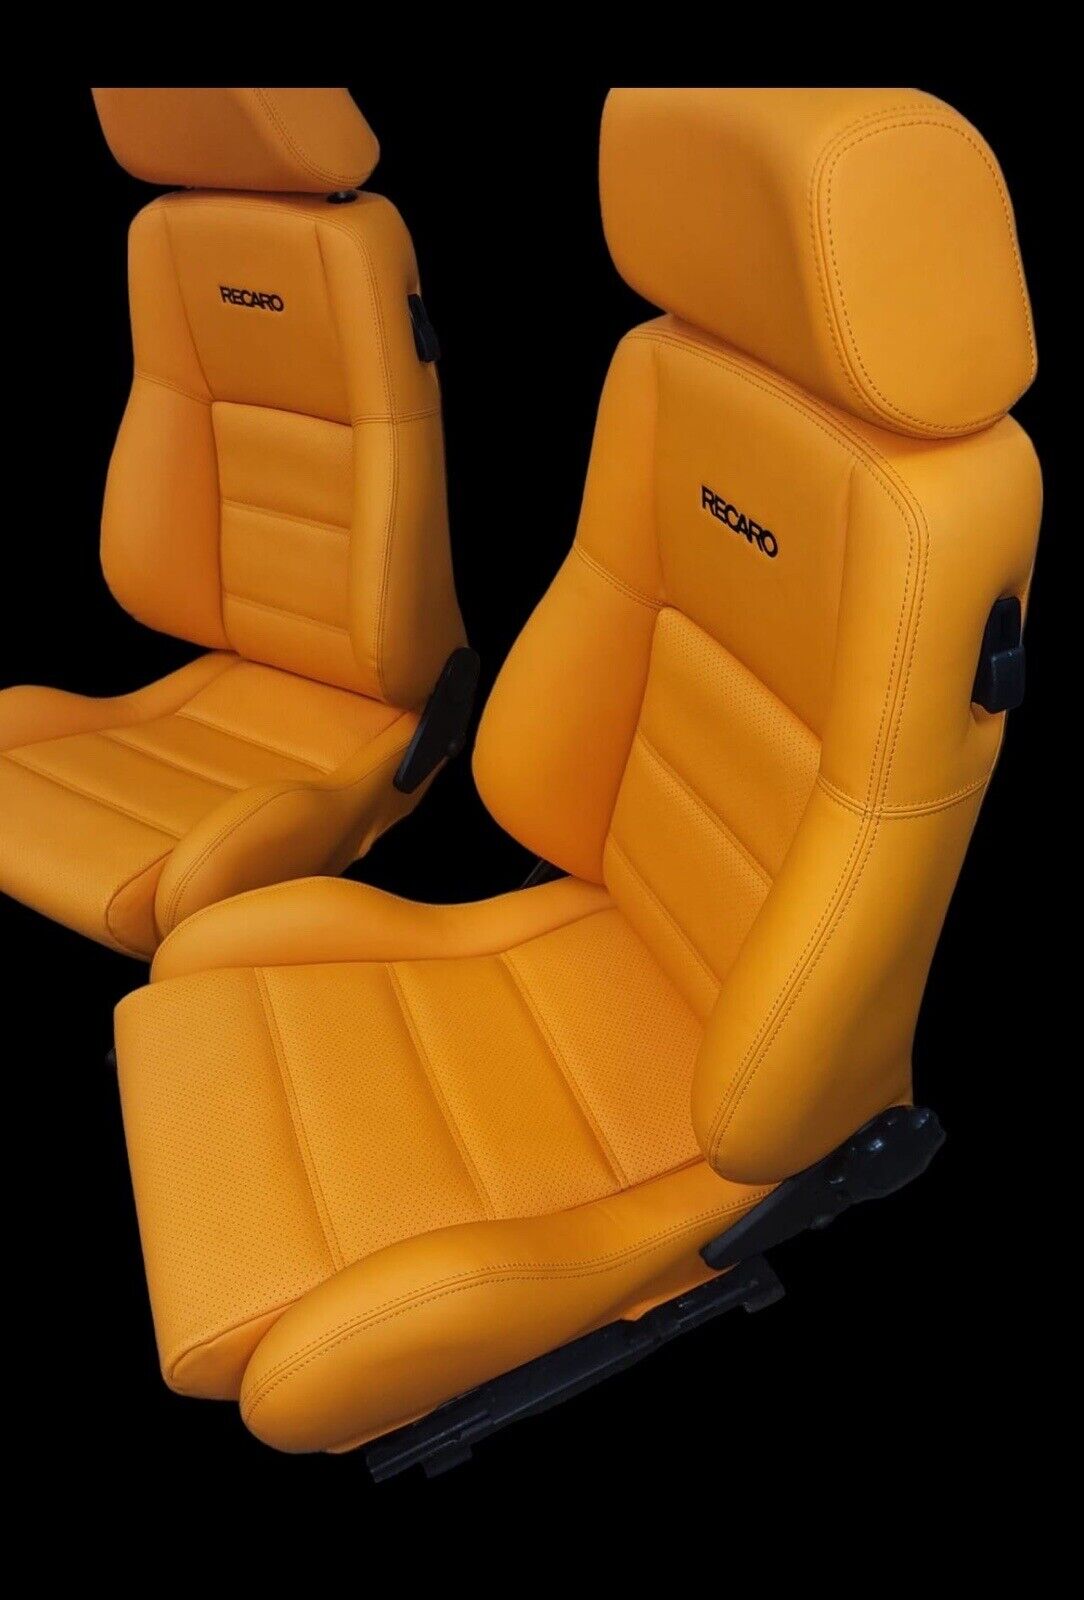 Classic Recaro Front Seats covered In Nappa Leather For Benz, BMW or Porsche